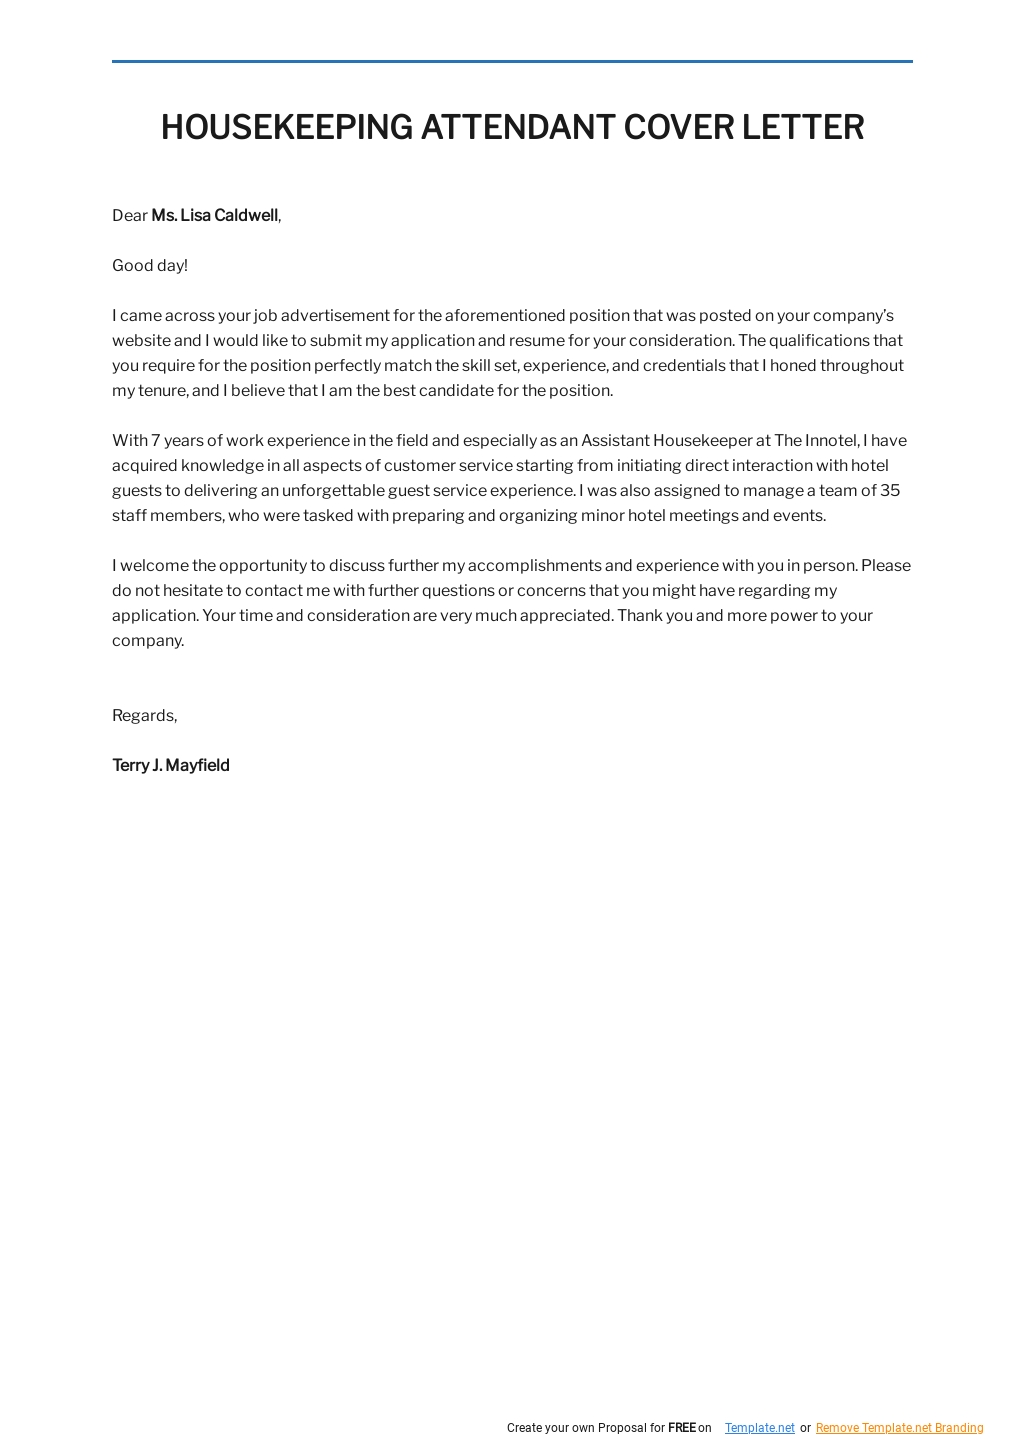 Free Housekeeping Attendant Cover Letter Template.jpe